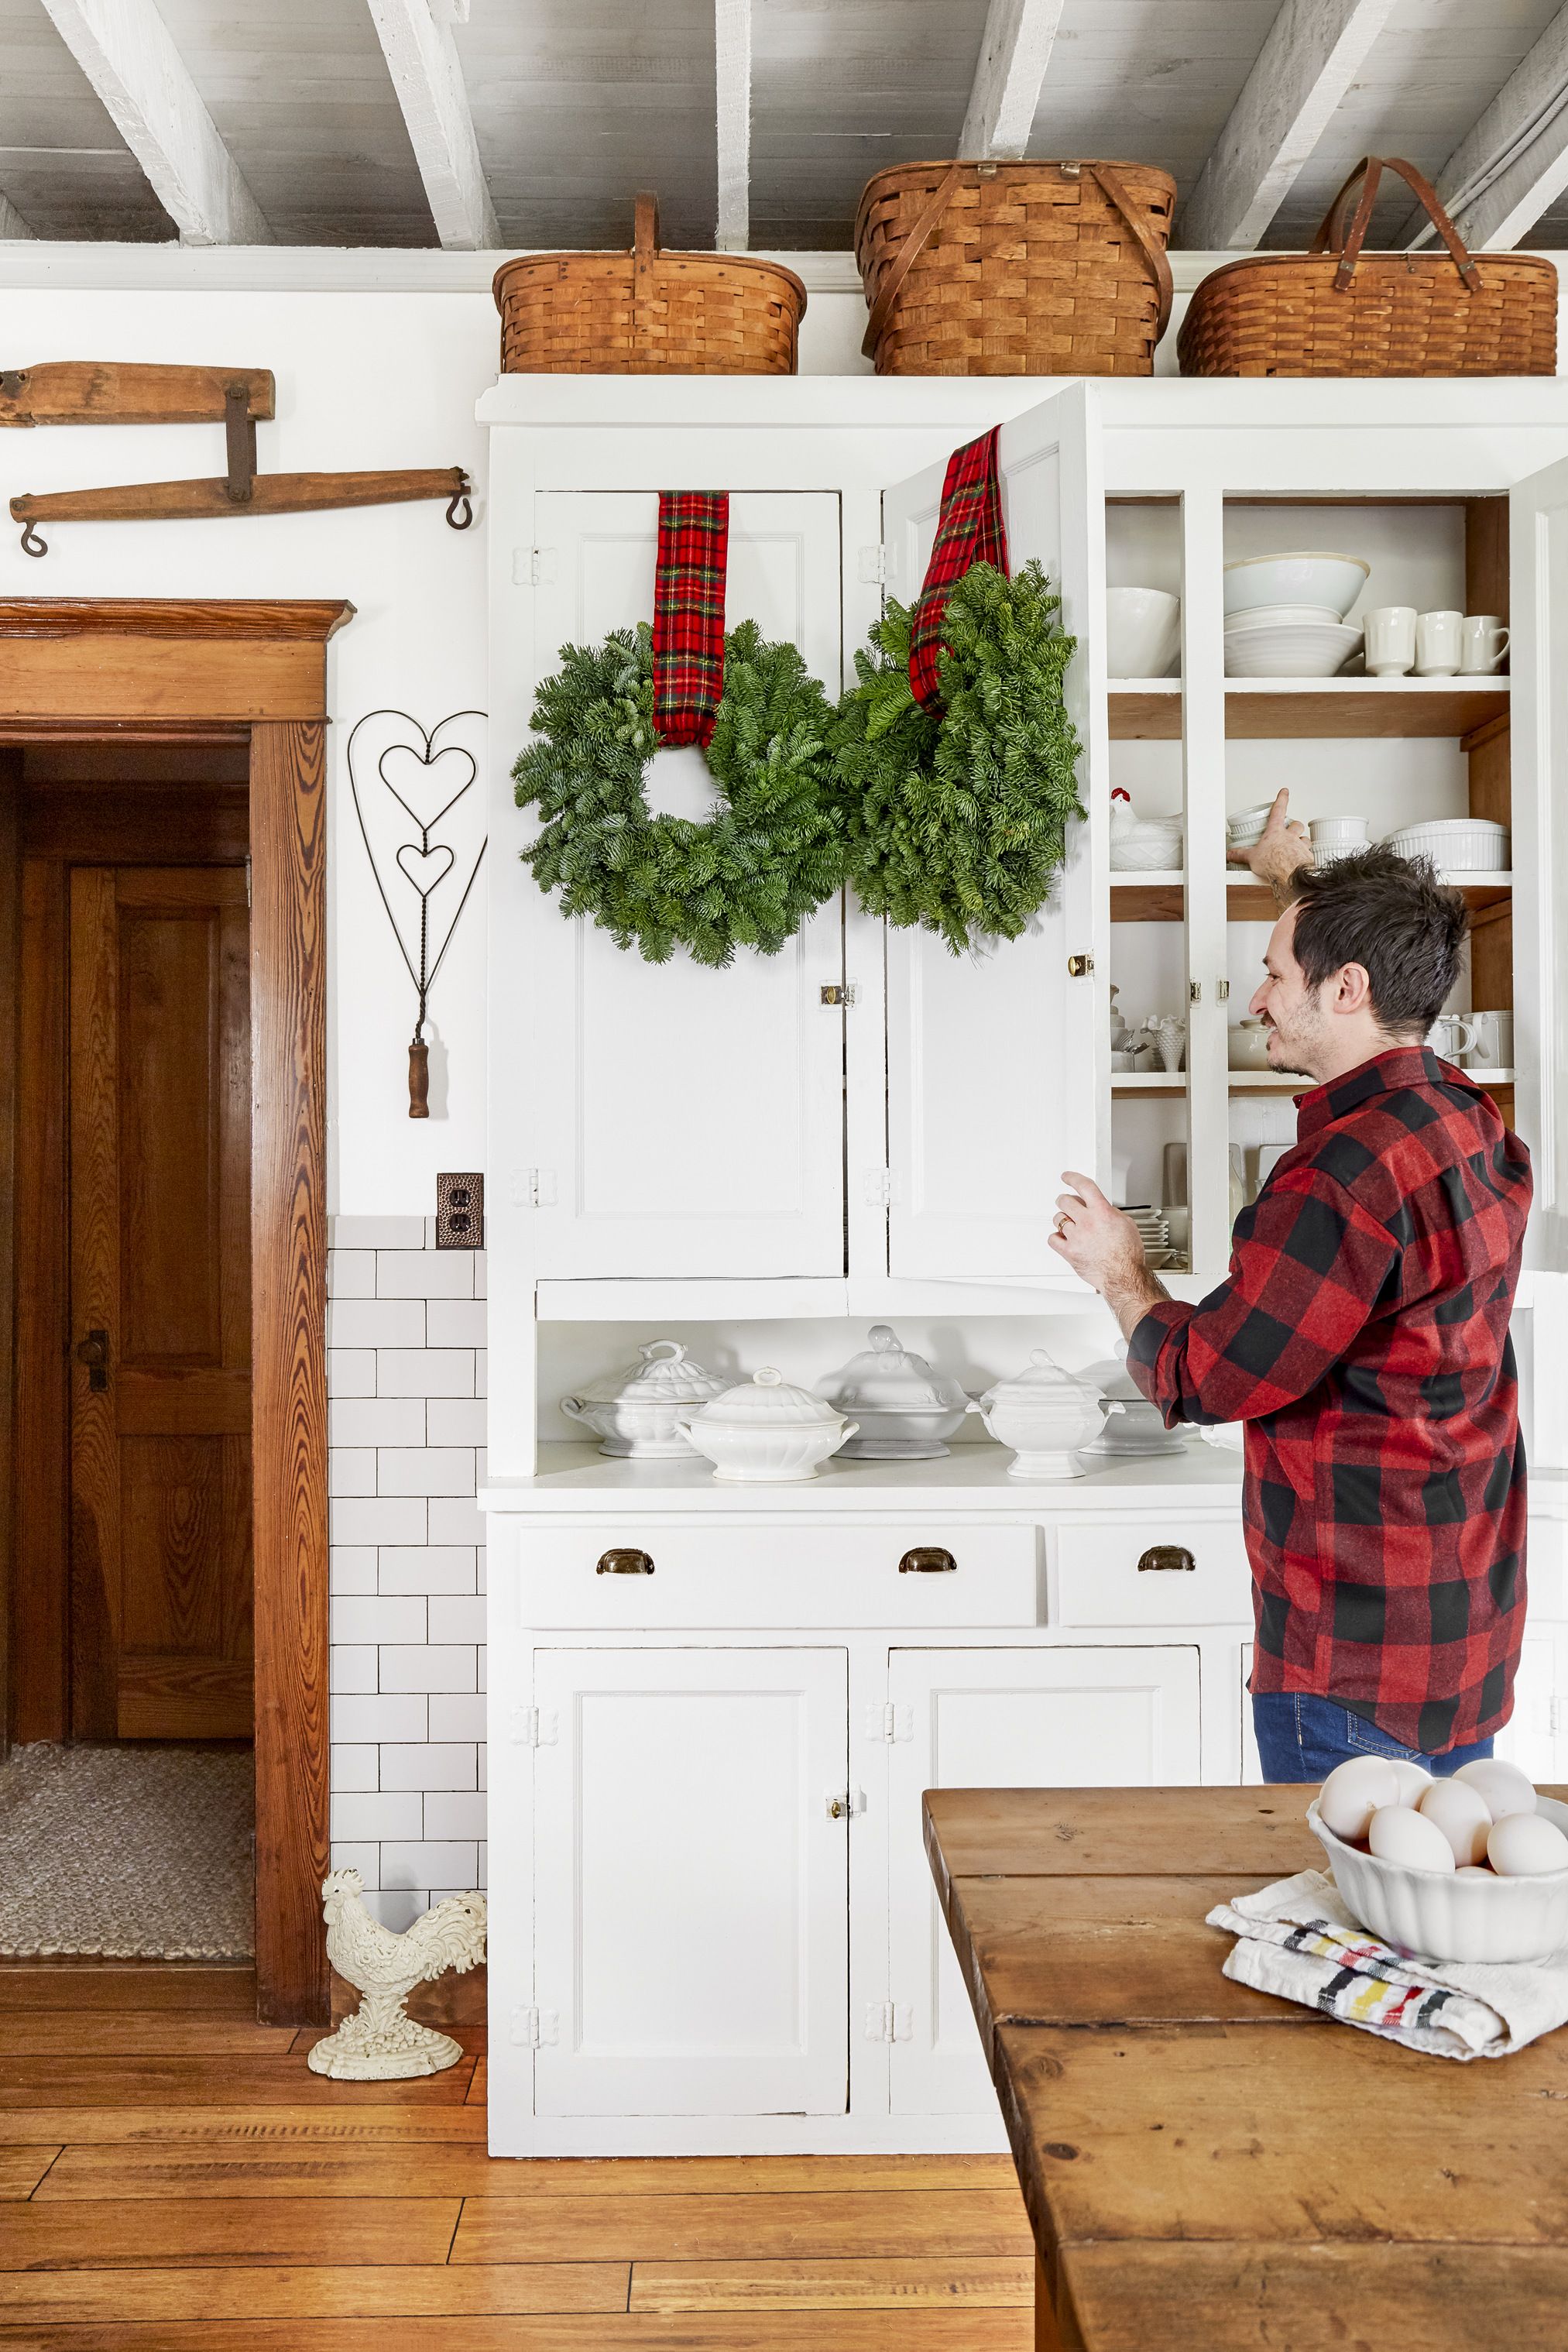 33 Kitchen Christmas Decorating Ideas How To Decorate Your Kitchen For Christmas